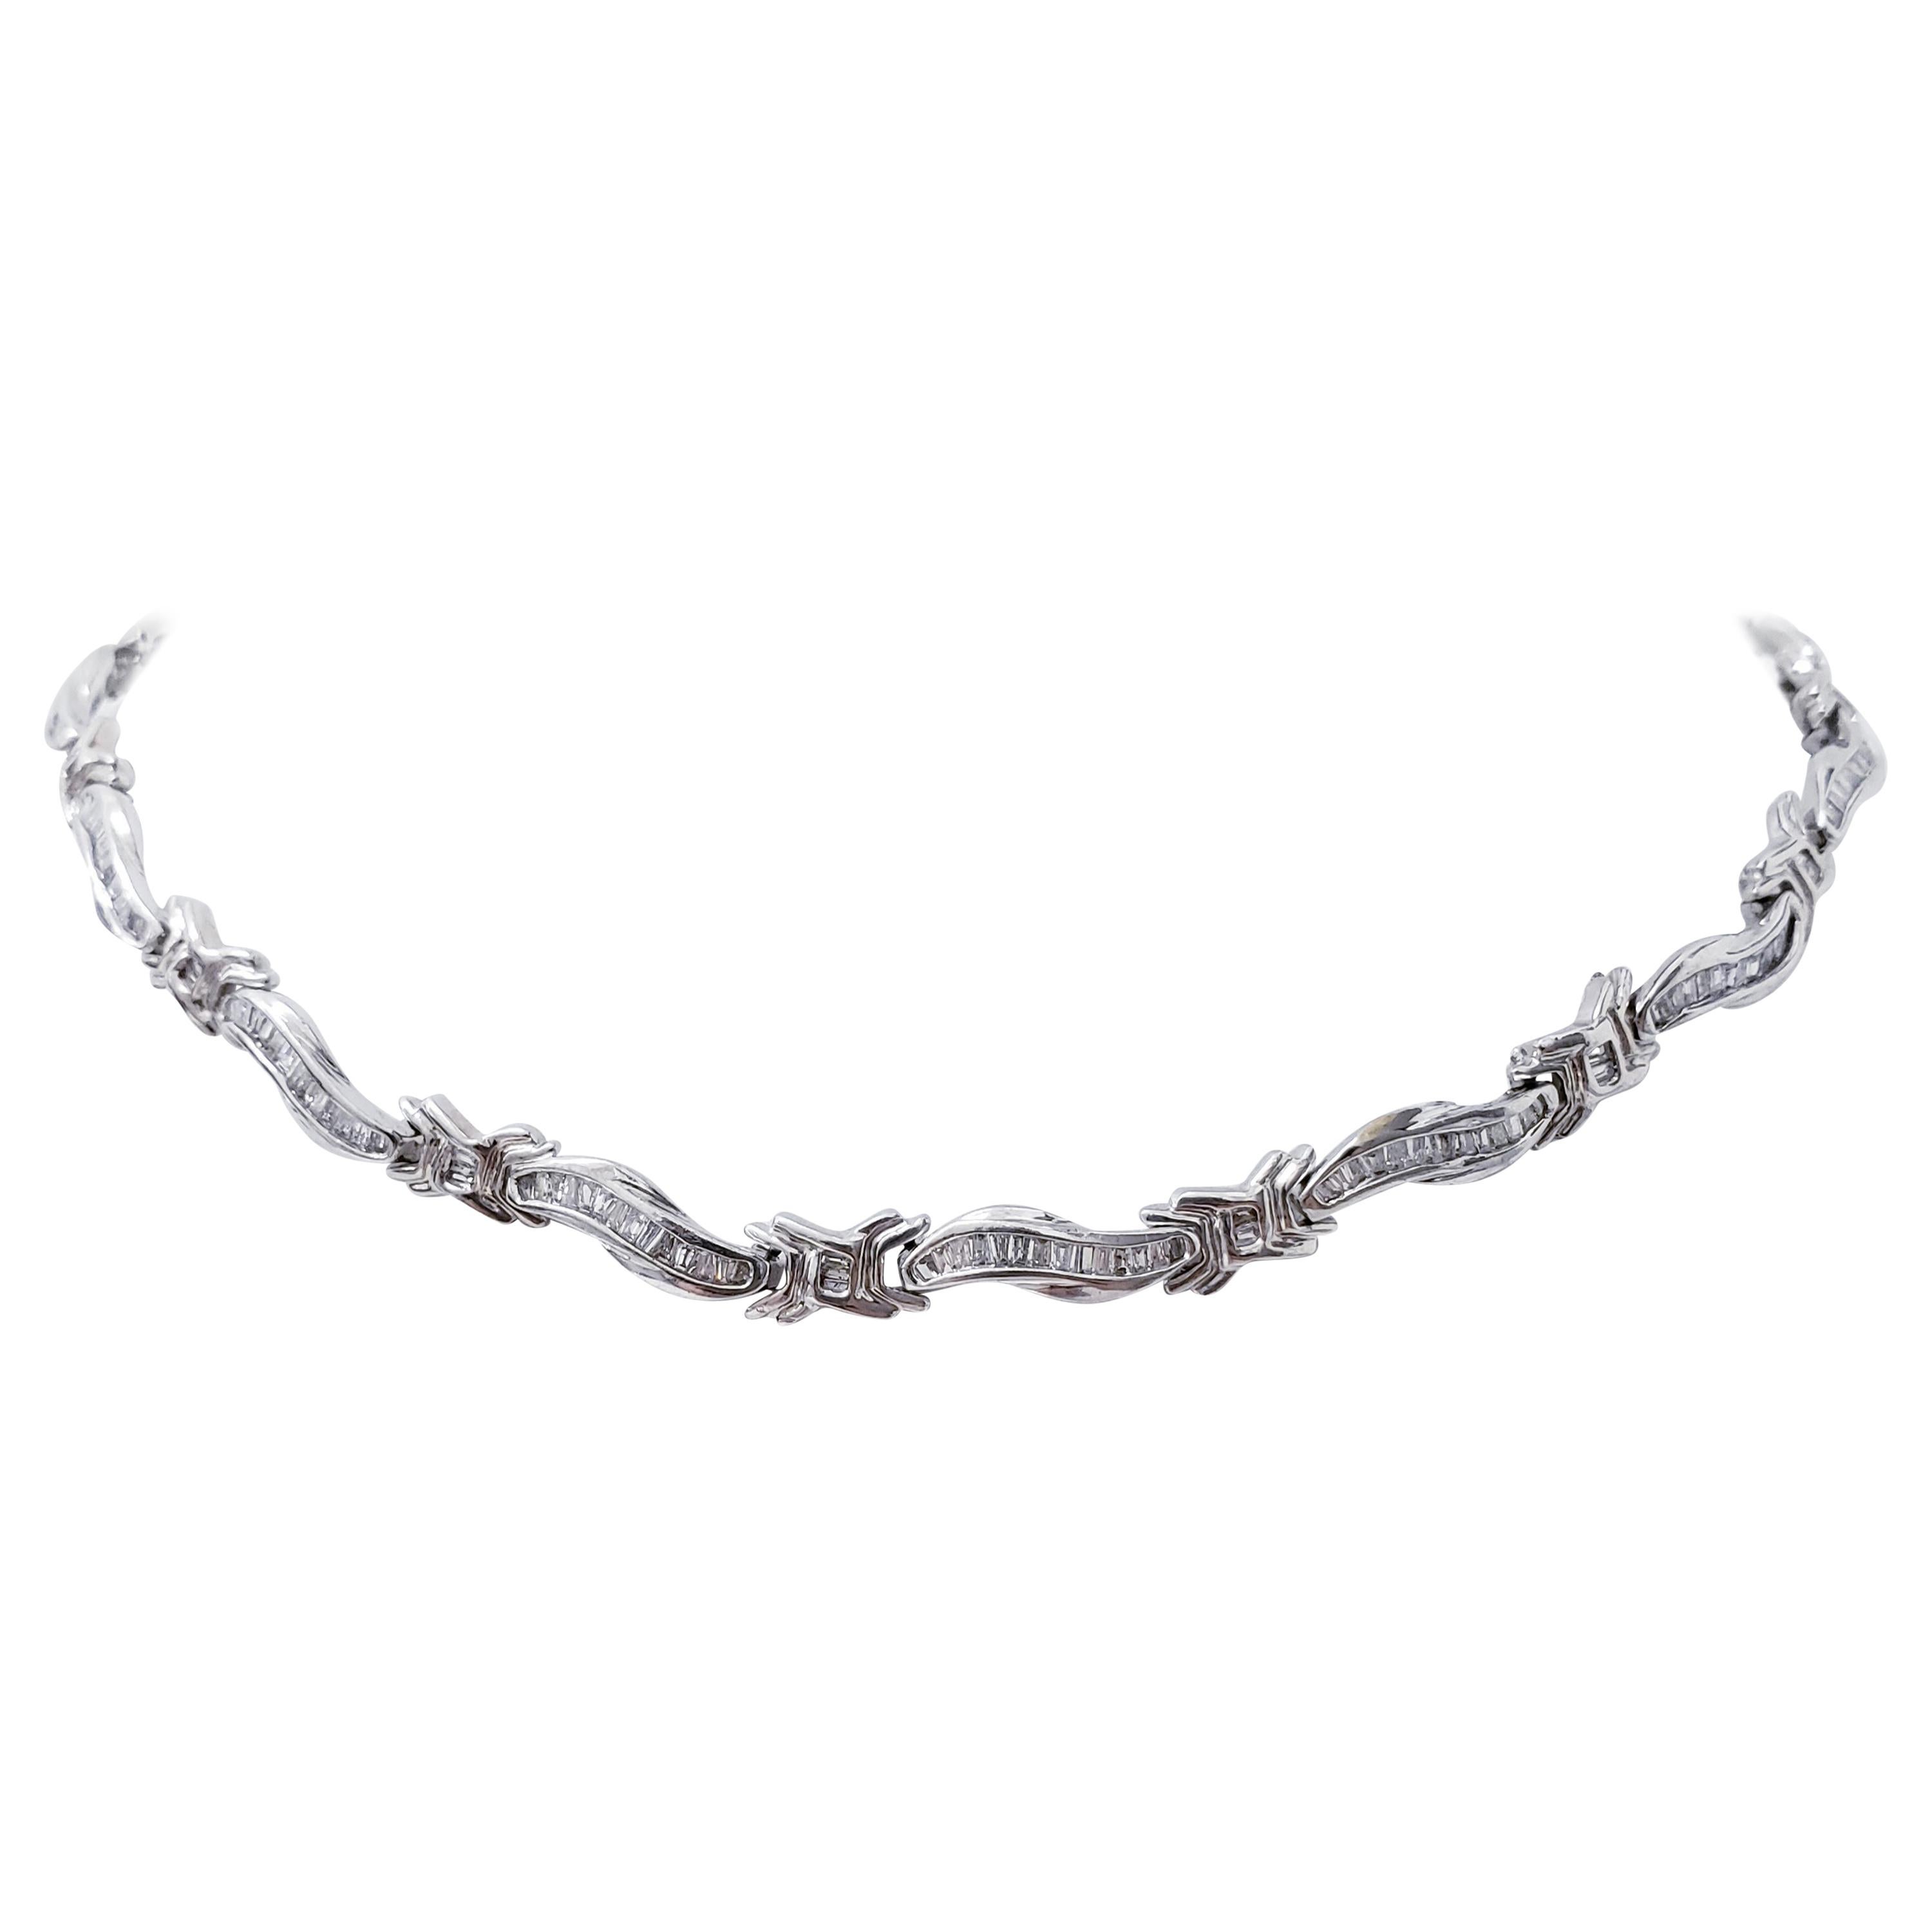 Vintage 10 Carats Baguette Diamonds Necklace Choker. Beautifully put together with X design every link. The diamonds approx weight 10 carats in 14k solid white gold. The Length of this necklace is 15 inches and the height of the link is 6mm. The